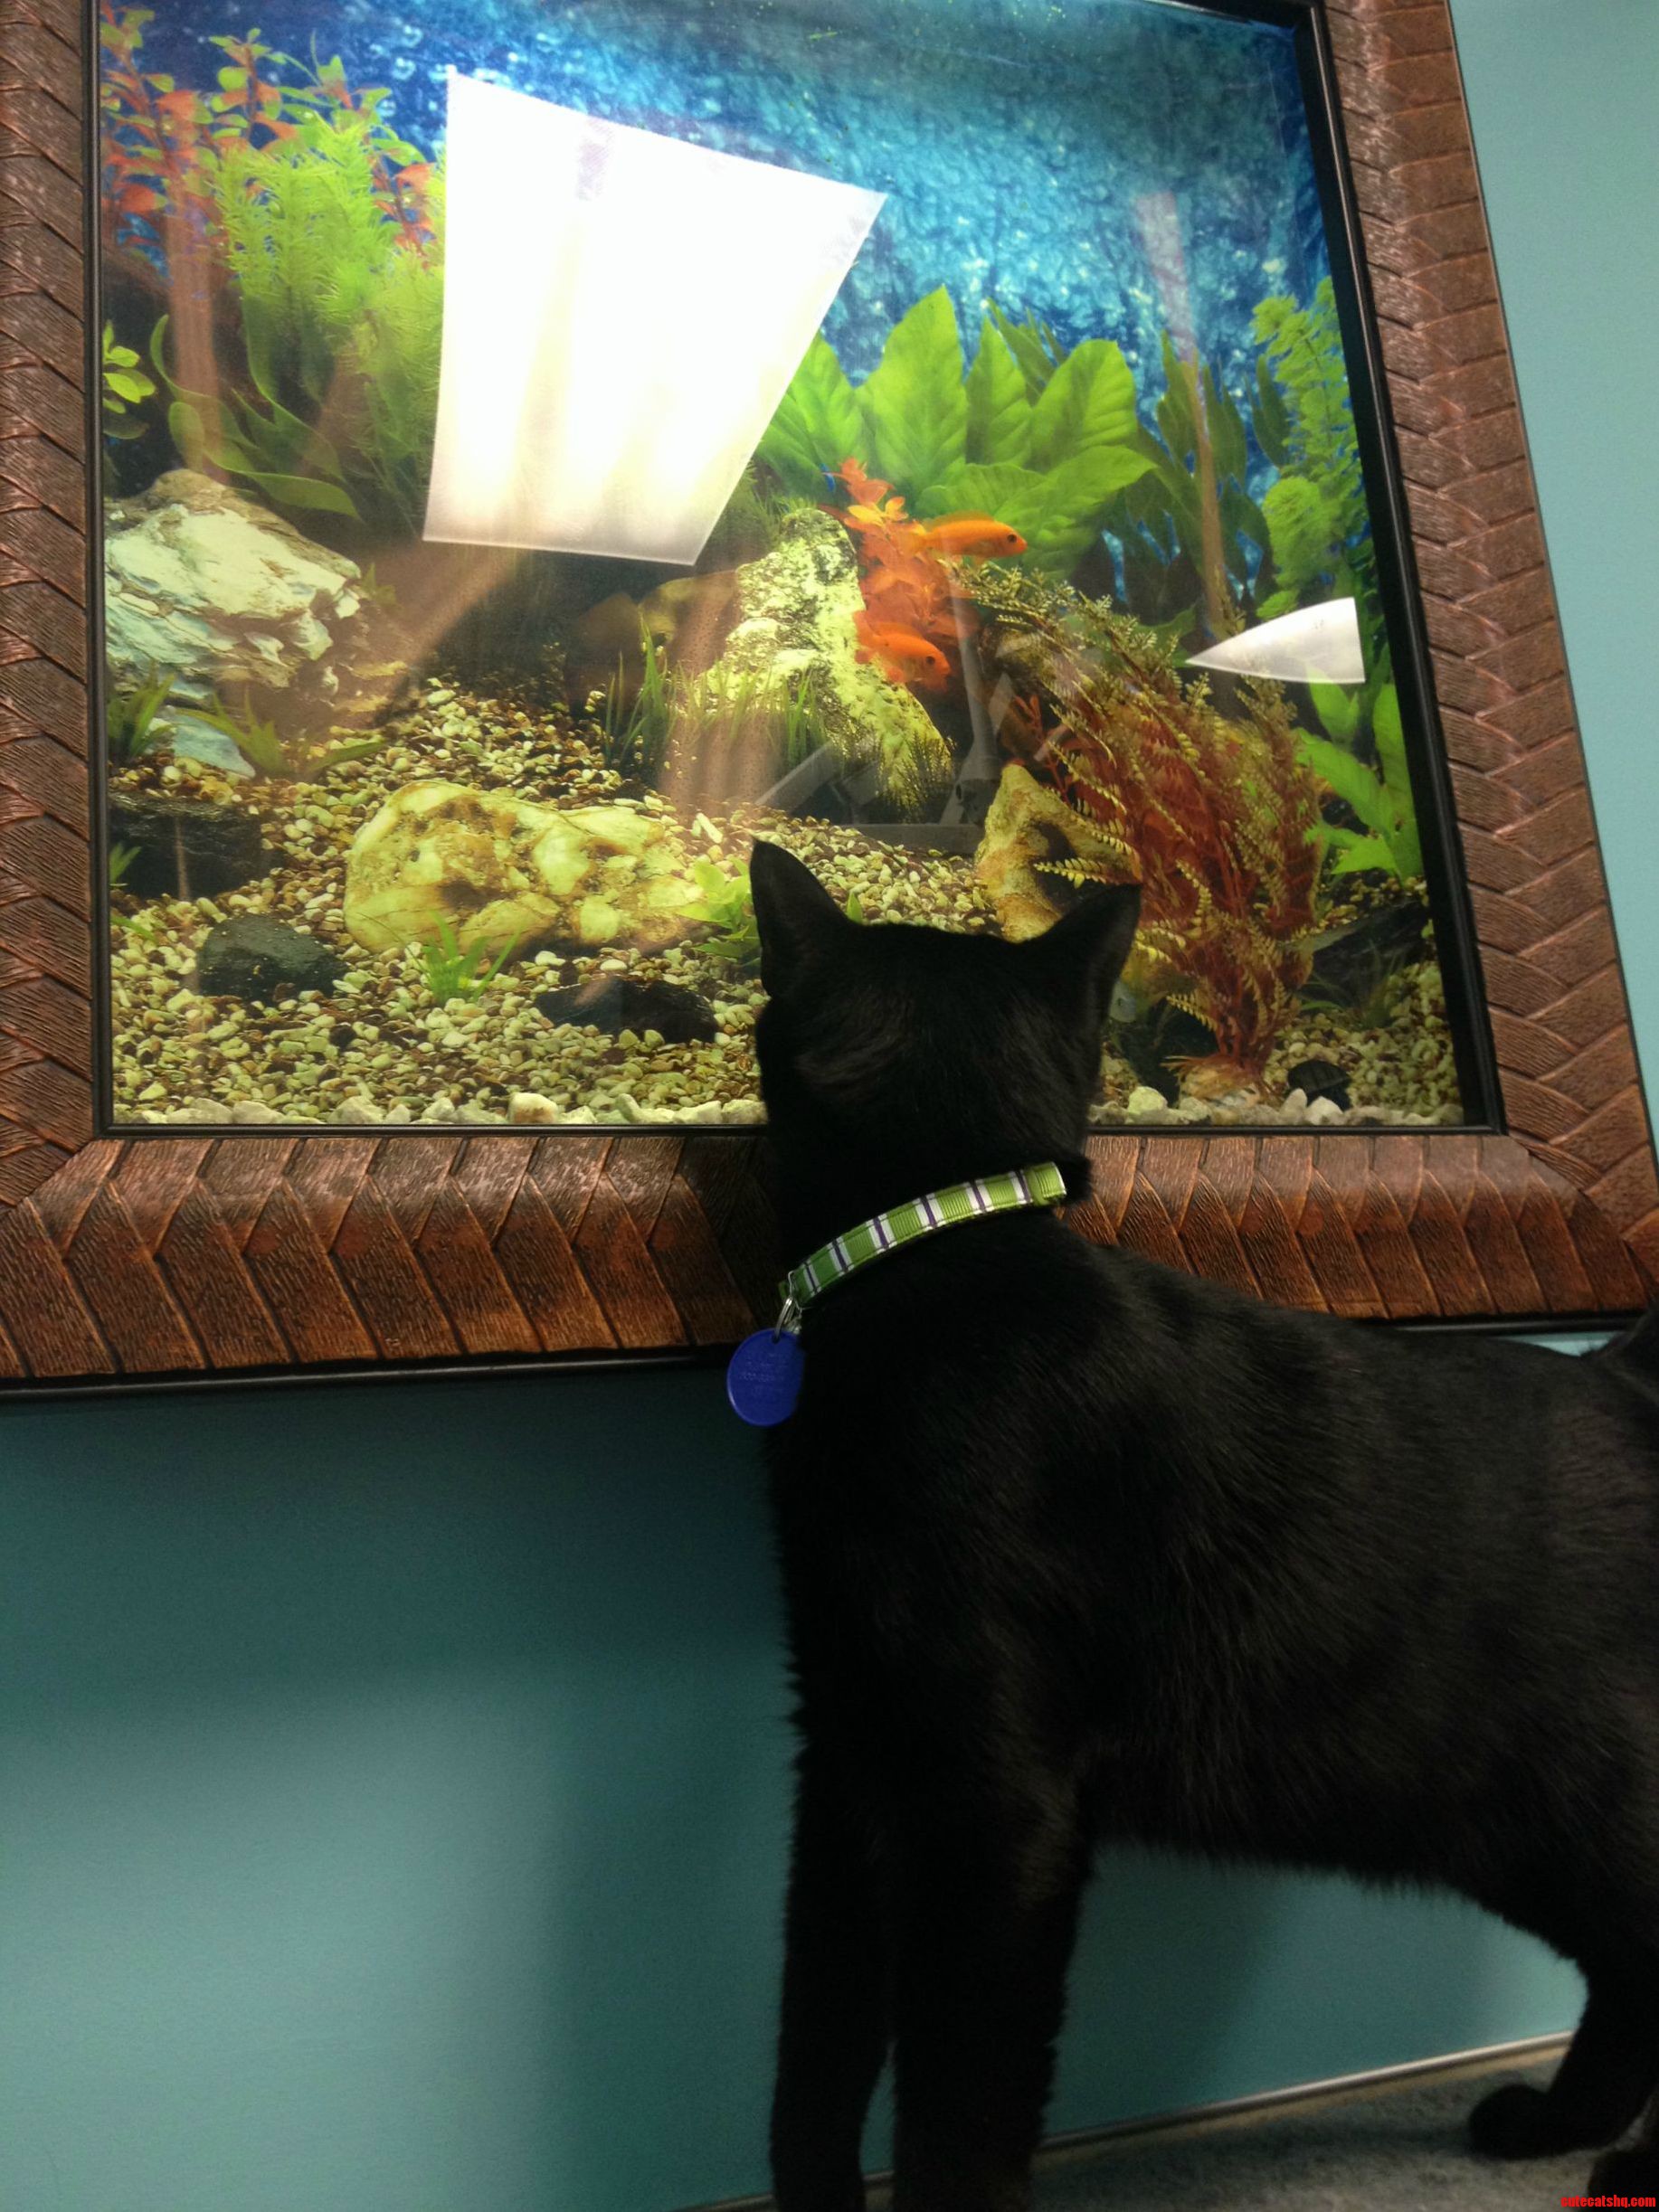 Voodoo Watching The Fish At His First Vet Visit.